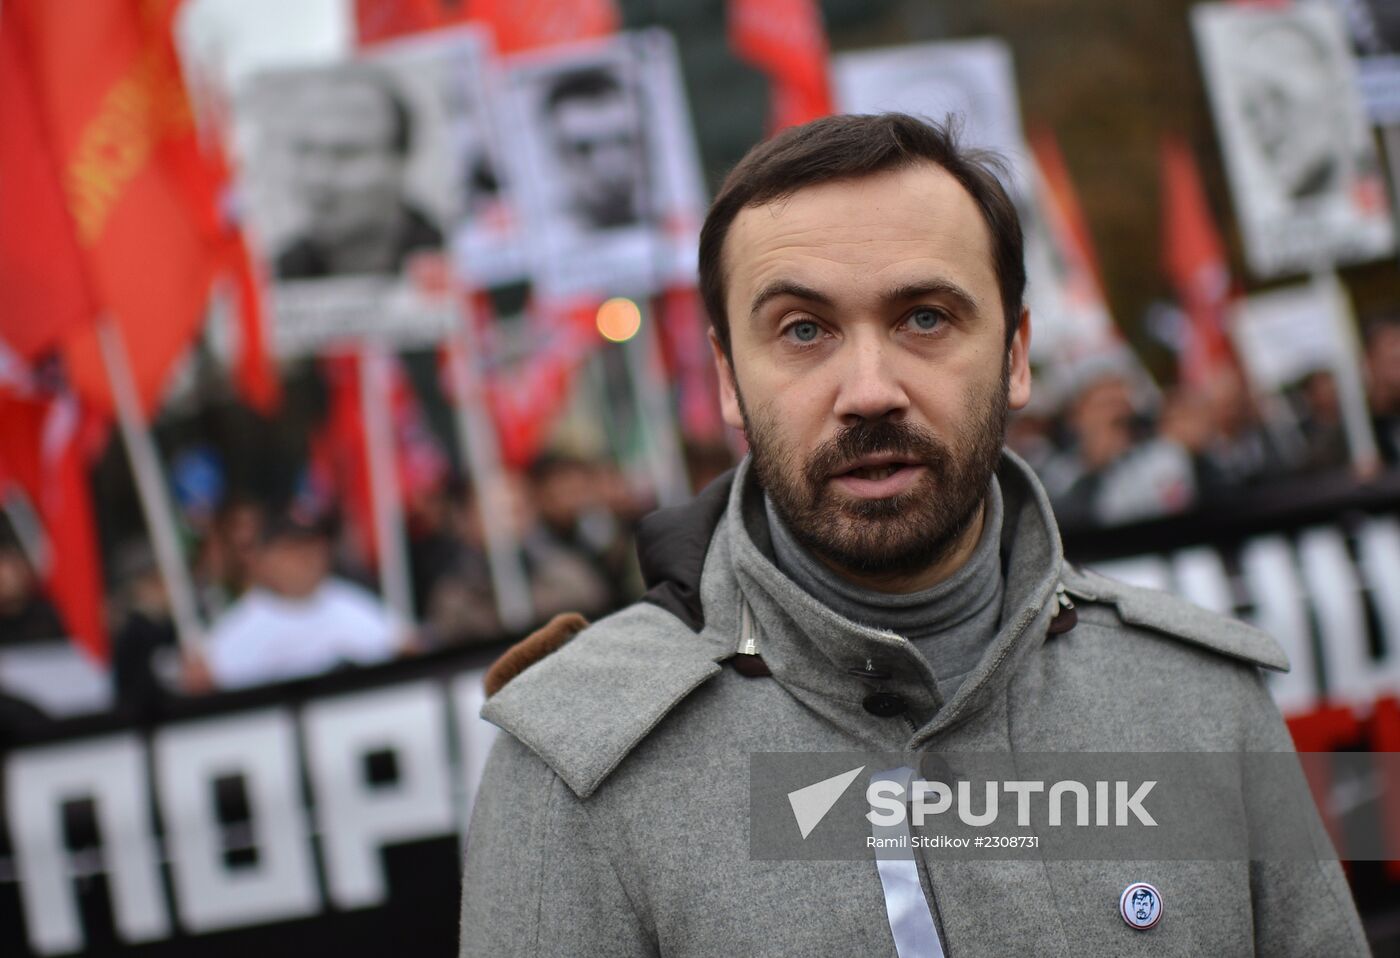 Opposition stages rally in support of political prisoners